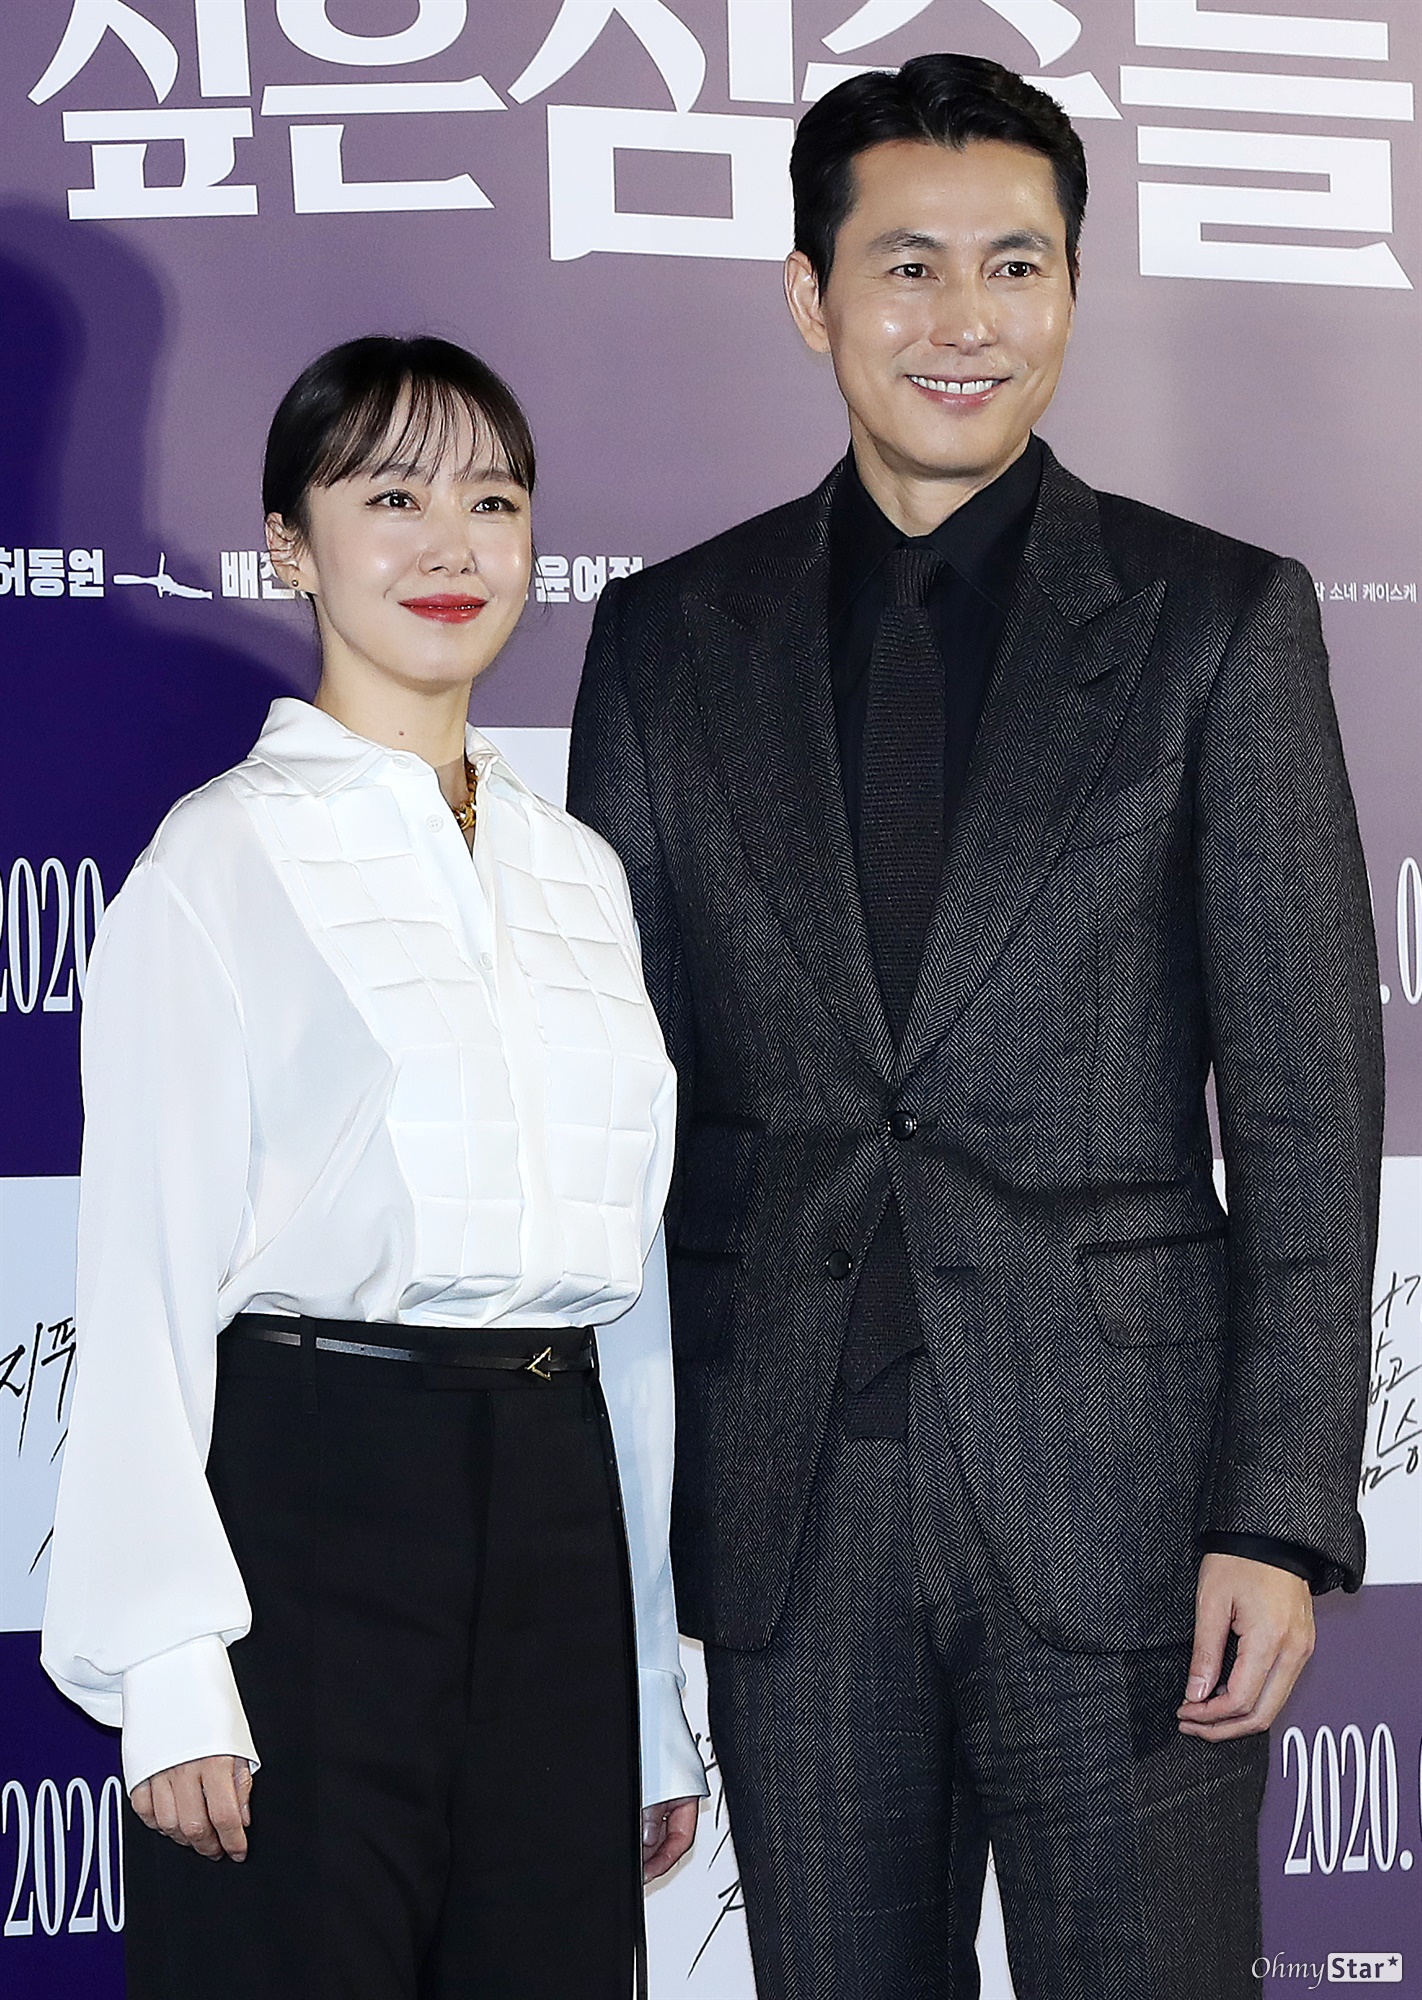 On the afternoon of the 3rd, the premiere of the media distribution of the movie The Animals Wanting to Hold the Spray was held at Megabox SCOX in Gangnam-gu, Seoul.The premiere was attended by Jeon Do-yeon, Jung Woo-sung, Bae Sung-woo, Yoon Yeo-jung, Shin Hyun-bin, Jungaram and Kim Yong-hoon.Is a film that shows the entangled desire of people who are pushed to the edge of the cliff, with a large amount of money bags suddenly appearing.Based on Japan novel of the same name written by Japan writer Sonne Kaske, he adapted director Kim Yong-hoon.Kim said, The most important thing I thought about in directing this movie is unpredictability.I thought that the audience should be able to see the story without knowing the back, and I thought I could see it while being interested to the end. Since the appearance of Jeon Do-yeon, the (story) puzzle is re-engineered.I am careful (to tell the contents) because of the element that it can enjoy for the audience who have not seen the movie yet.Jeon Do-yeon said, I did not want to emphasize that Yeon-hee was already strong enough in the script because of Yi Gi.I thought I should act as if I were pulling out my strength, and when I filmed, I tried to postpone it as naturally as possible. On the other hand, Jung Woo-sung laughed at the first shooting when he said that Kim Yong-hoon and Staff were embarrassed.He said: We designed (the character) while maximizing the loopholes that Tae-Young has; we saw the bishops and staff panicking at the first shoot.I did not show Tai-Young in turn, but I think I shot the most dramatic scene first.It was a process to show and prove Tae-Young while overcoming the unfamiliar feelings that I looked at at in the field. It is not a youth viewing grade, but there are not many unexpected cruel scenes in movies.Domestic violence gods, assault gods, and murder gods appear many times, but most audiences can only analogize the scene by sound.The director said, I was worried about how the audience could see without being struggling.Actors also praised him for not being a rookie director. Jeon Do-yeon said, I worked very much with the rookie director, but I was a little worried (before filming).There are so many good actors that I wanted to be able to digest them in the field, but when I watched the movie, it was obvious that the director had a lot of trouble. Jung Woo-sung also added, It was a director who felt relaxed in the field.The work of an old Actor and a rookie director needs to be relaxed to look at each other without fretting.If there is a strong will to shoot the new director as he or she has perfectly drawn himself or herself, communication with Actor in the field can be as difficult as a big wall.As for Actor, we need to calmly see what the word the new coach uses. To do that, we need to make great room.The first shot of Tae-Young must have been embarrassing, but I listened calmly to why I played Tae-Young so and nodded, Its okay. (Jung Woo-sung)Movies of Animals Wanting to Hold a Spray